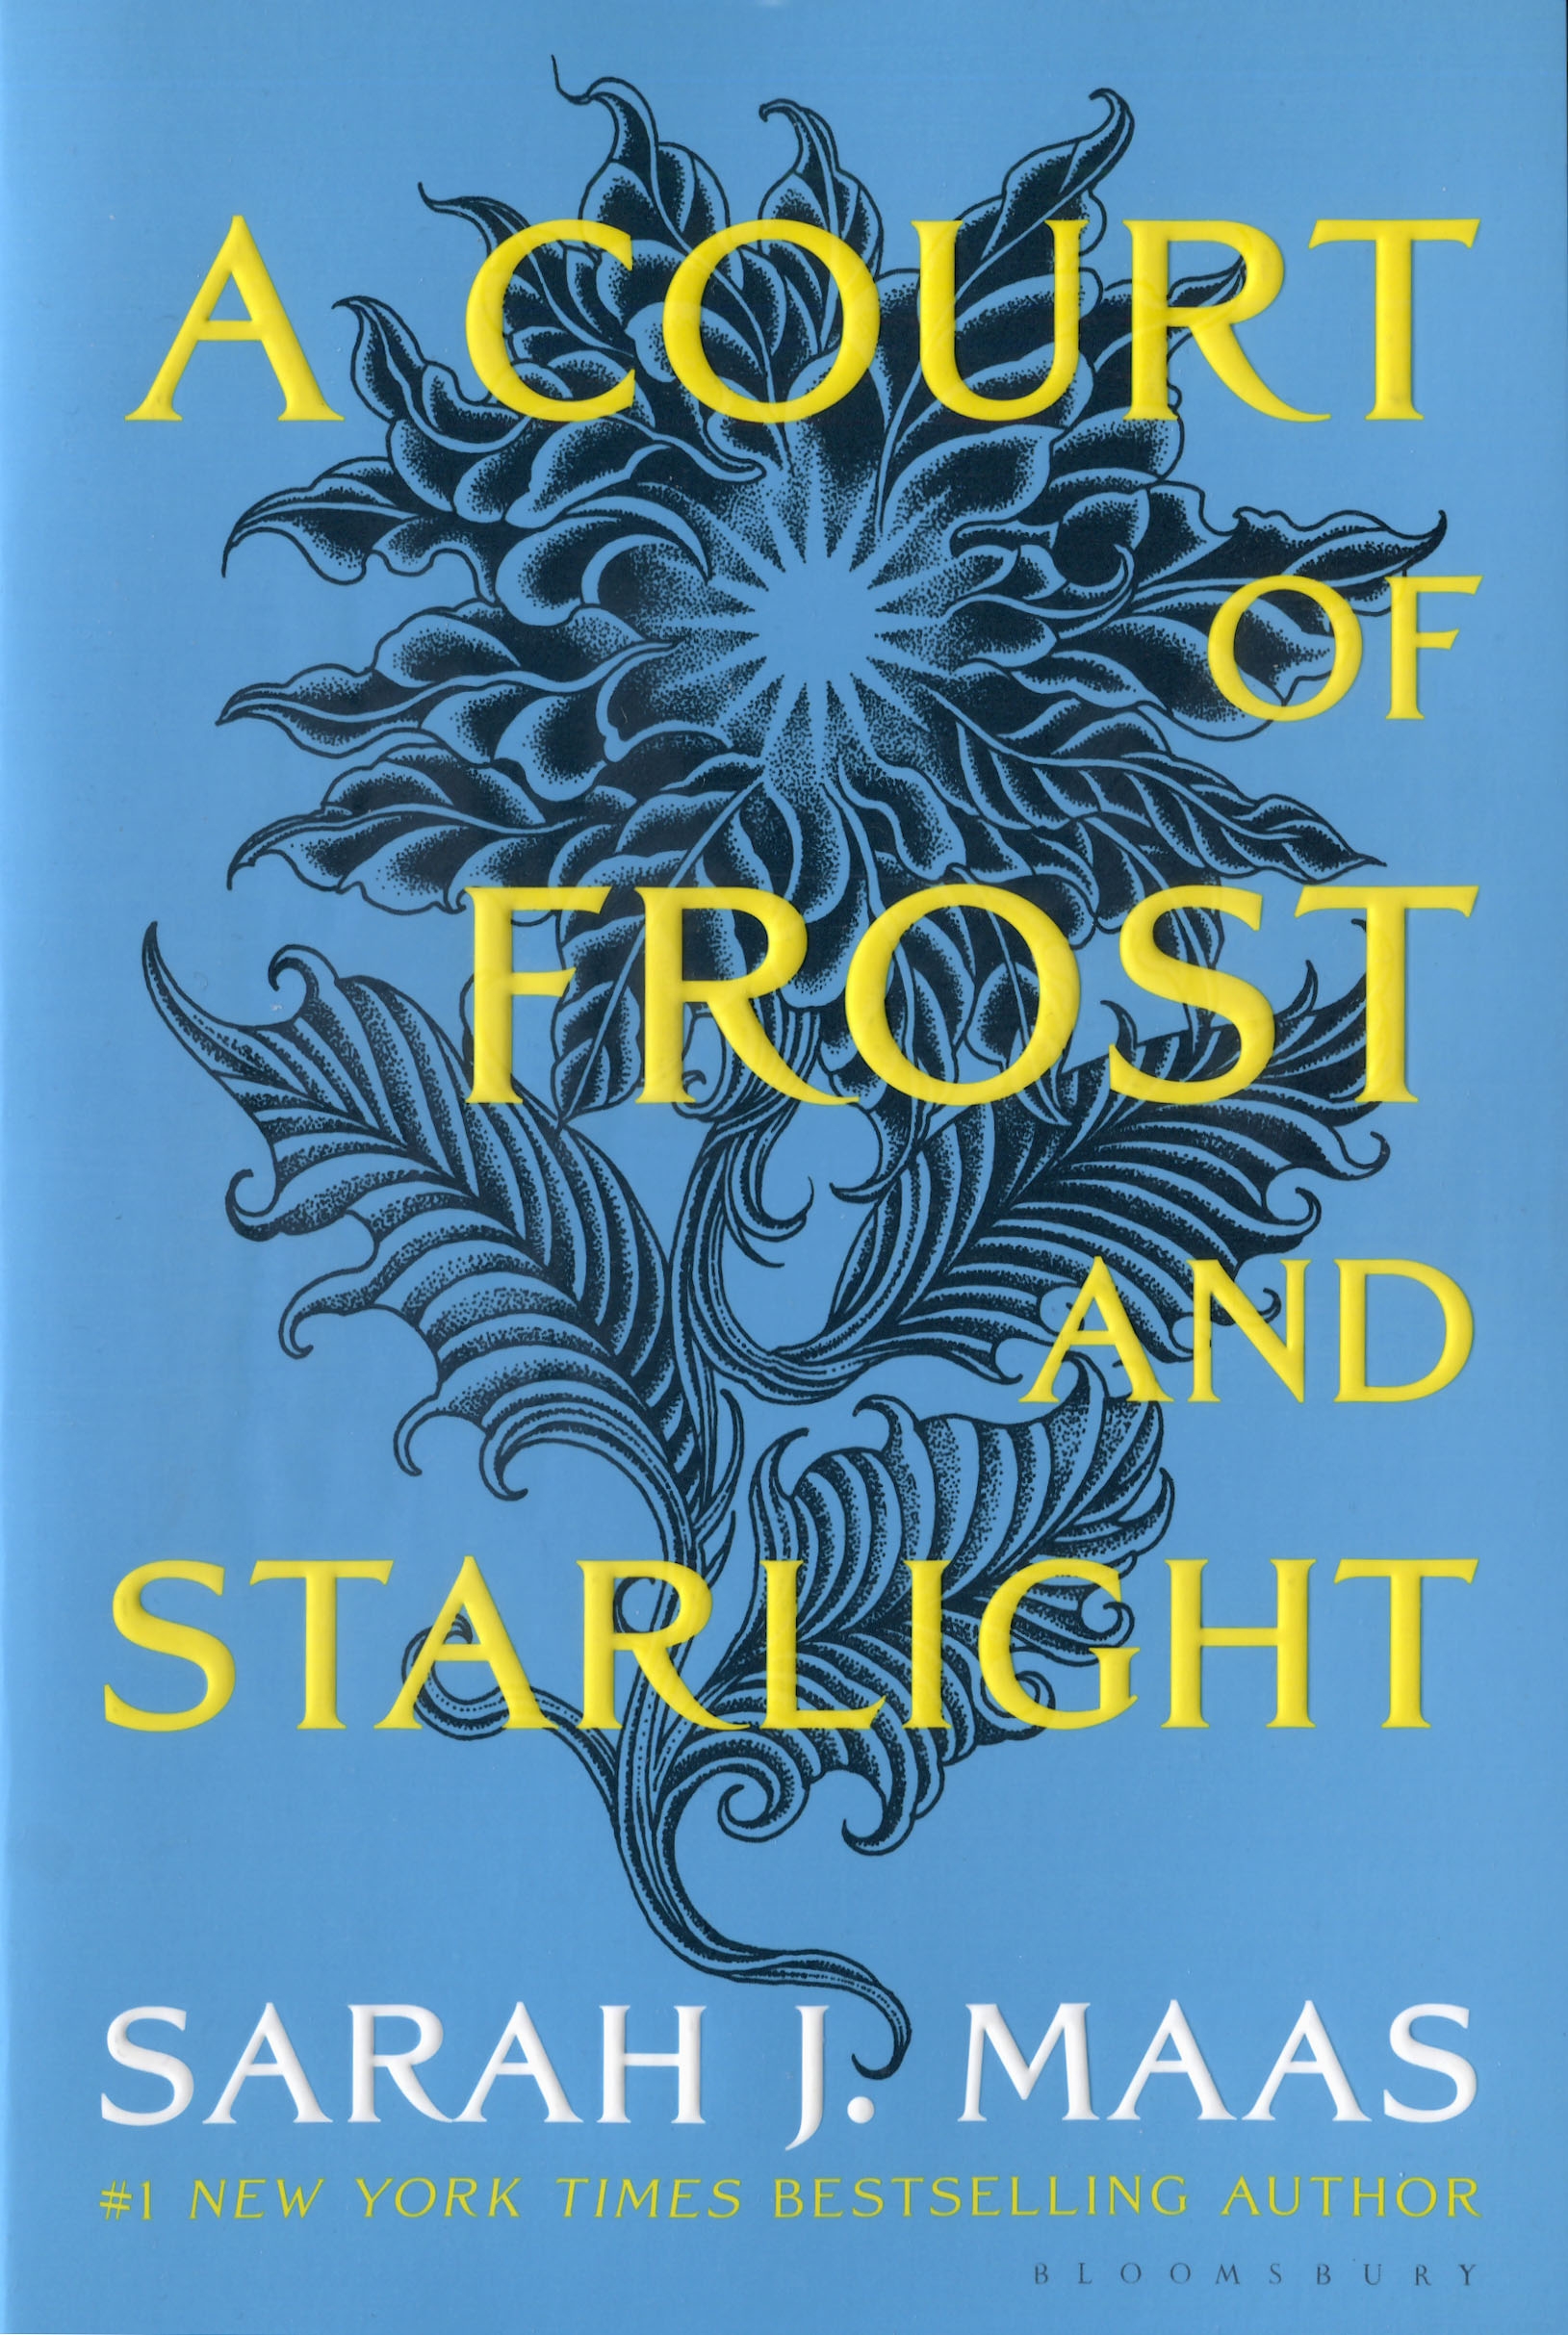 Image de couverture de A Court of Frost and Starlight [electronic resource] : A Court of Thorns and Roses, Book 4